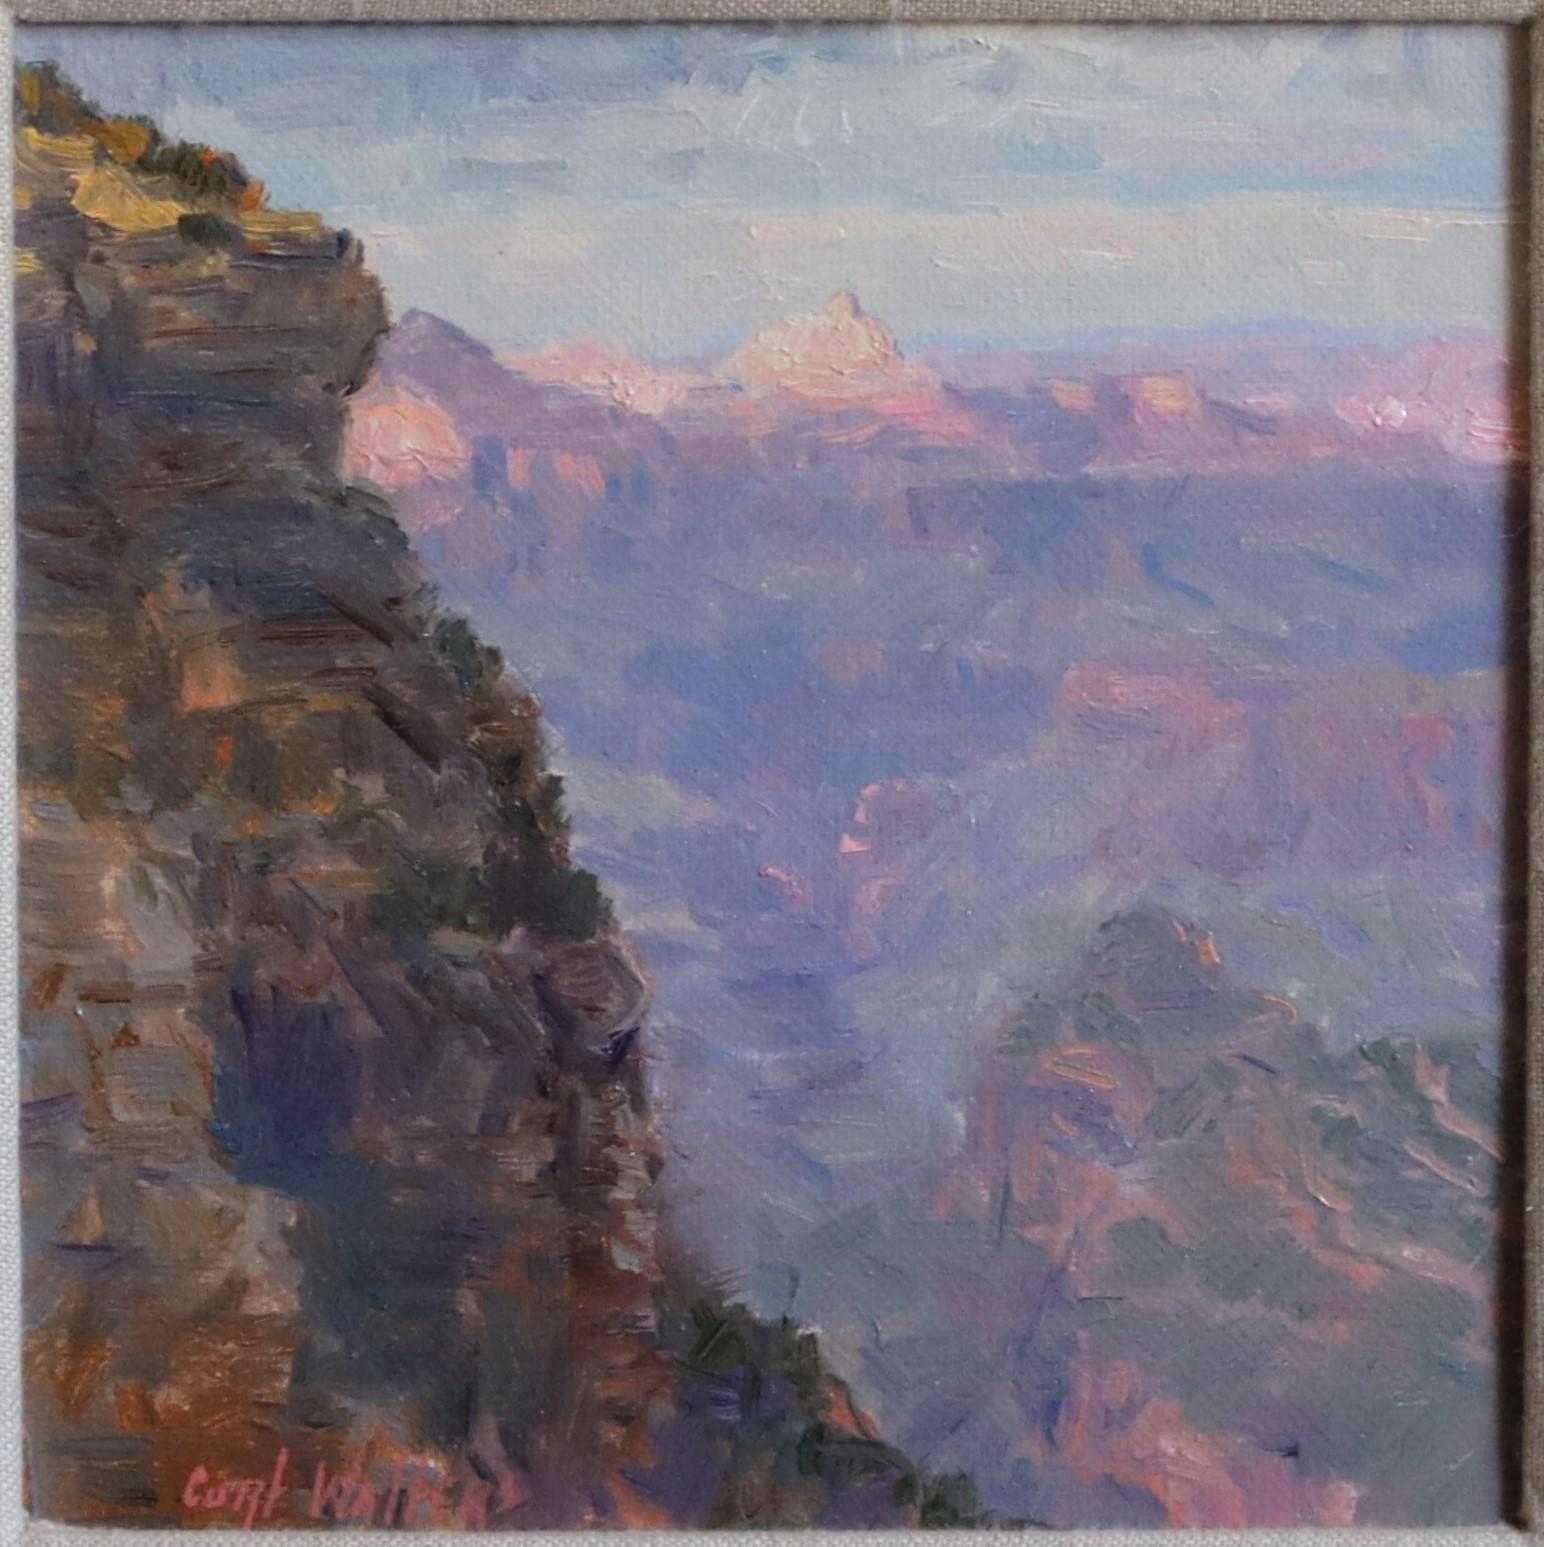 Grand Canyon Landscape - Painting by Curt Walters